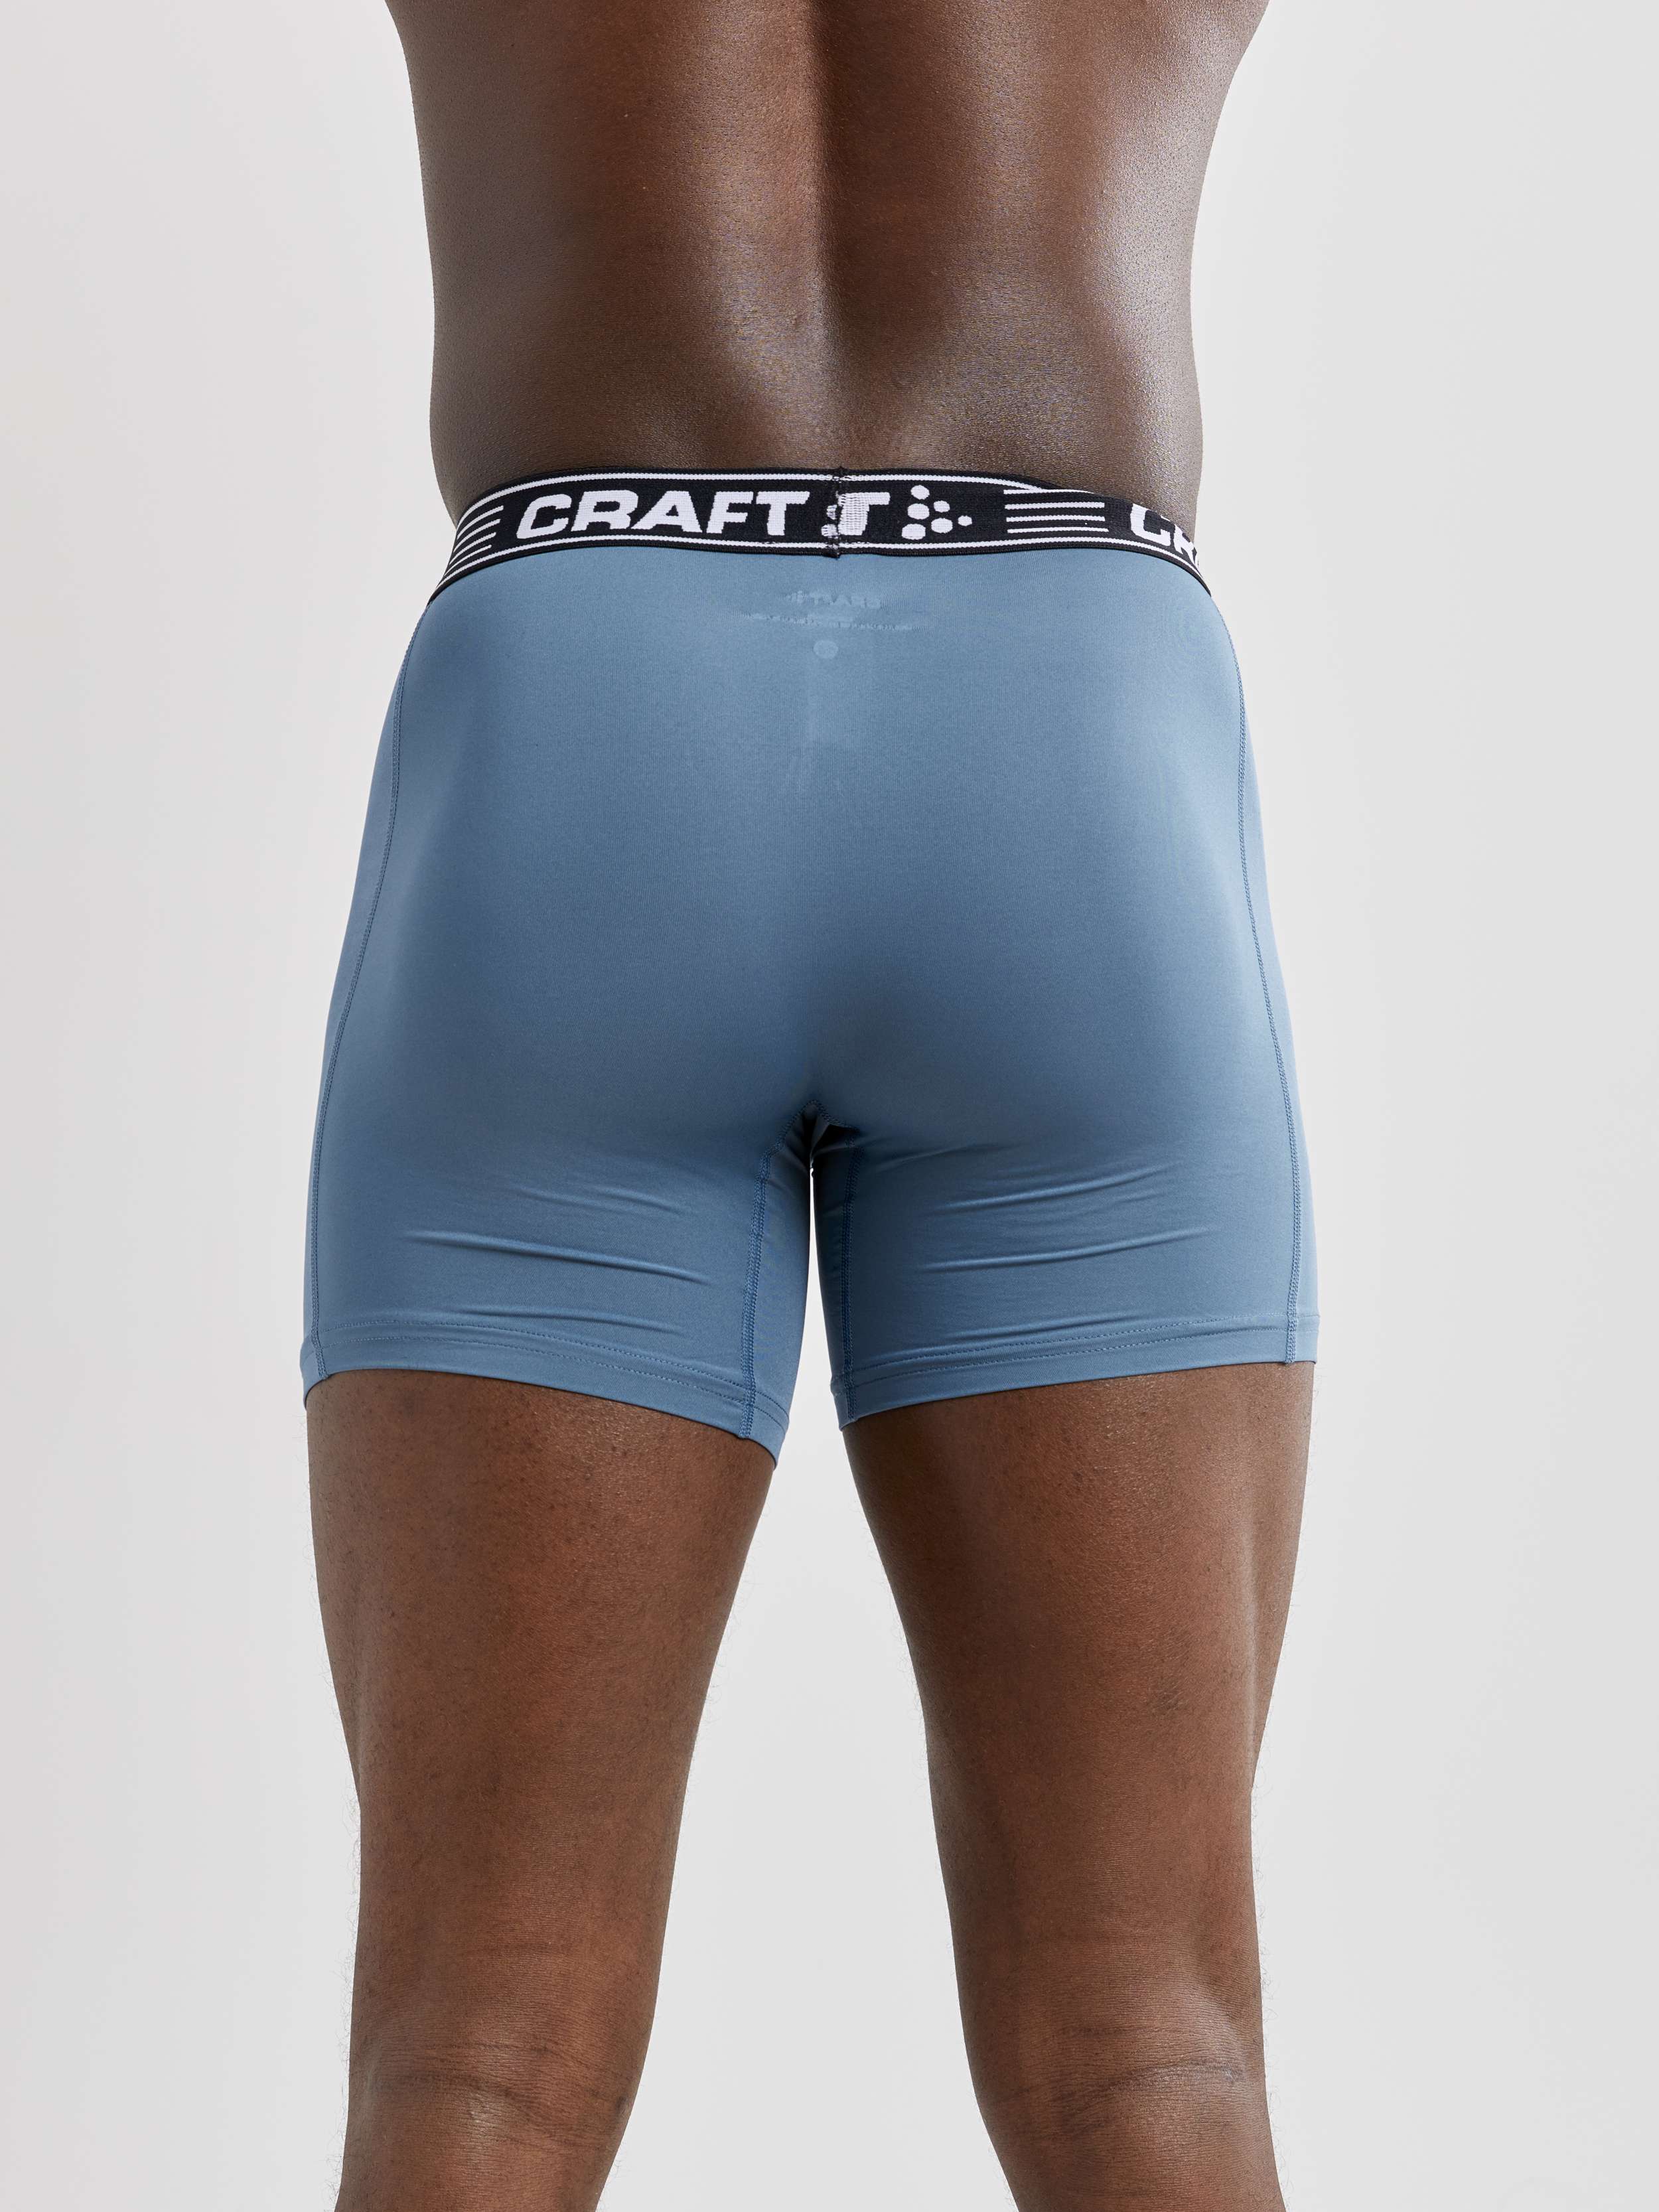 Cycling-Pants greatness sports under part Craft Mens Boxer 6-Inch New Boxer 